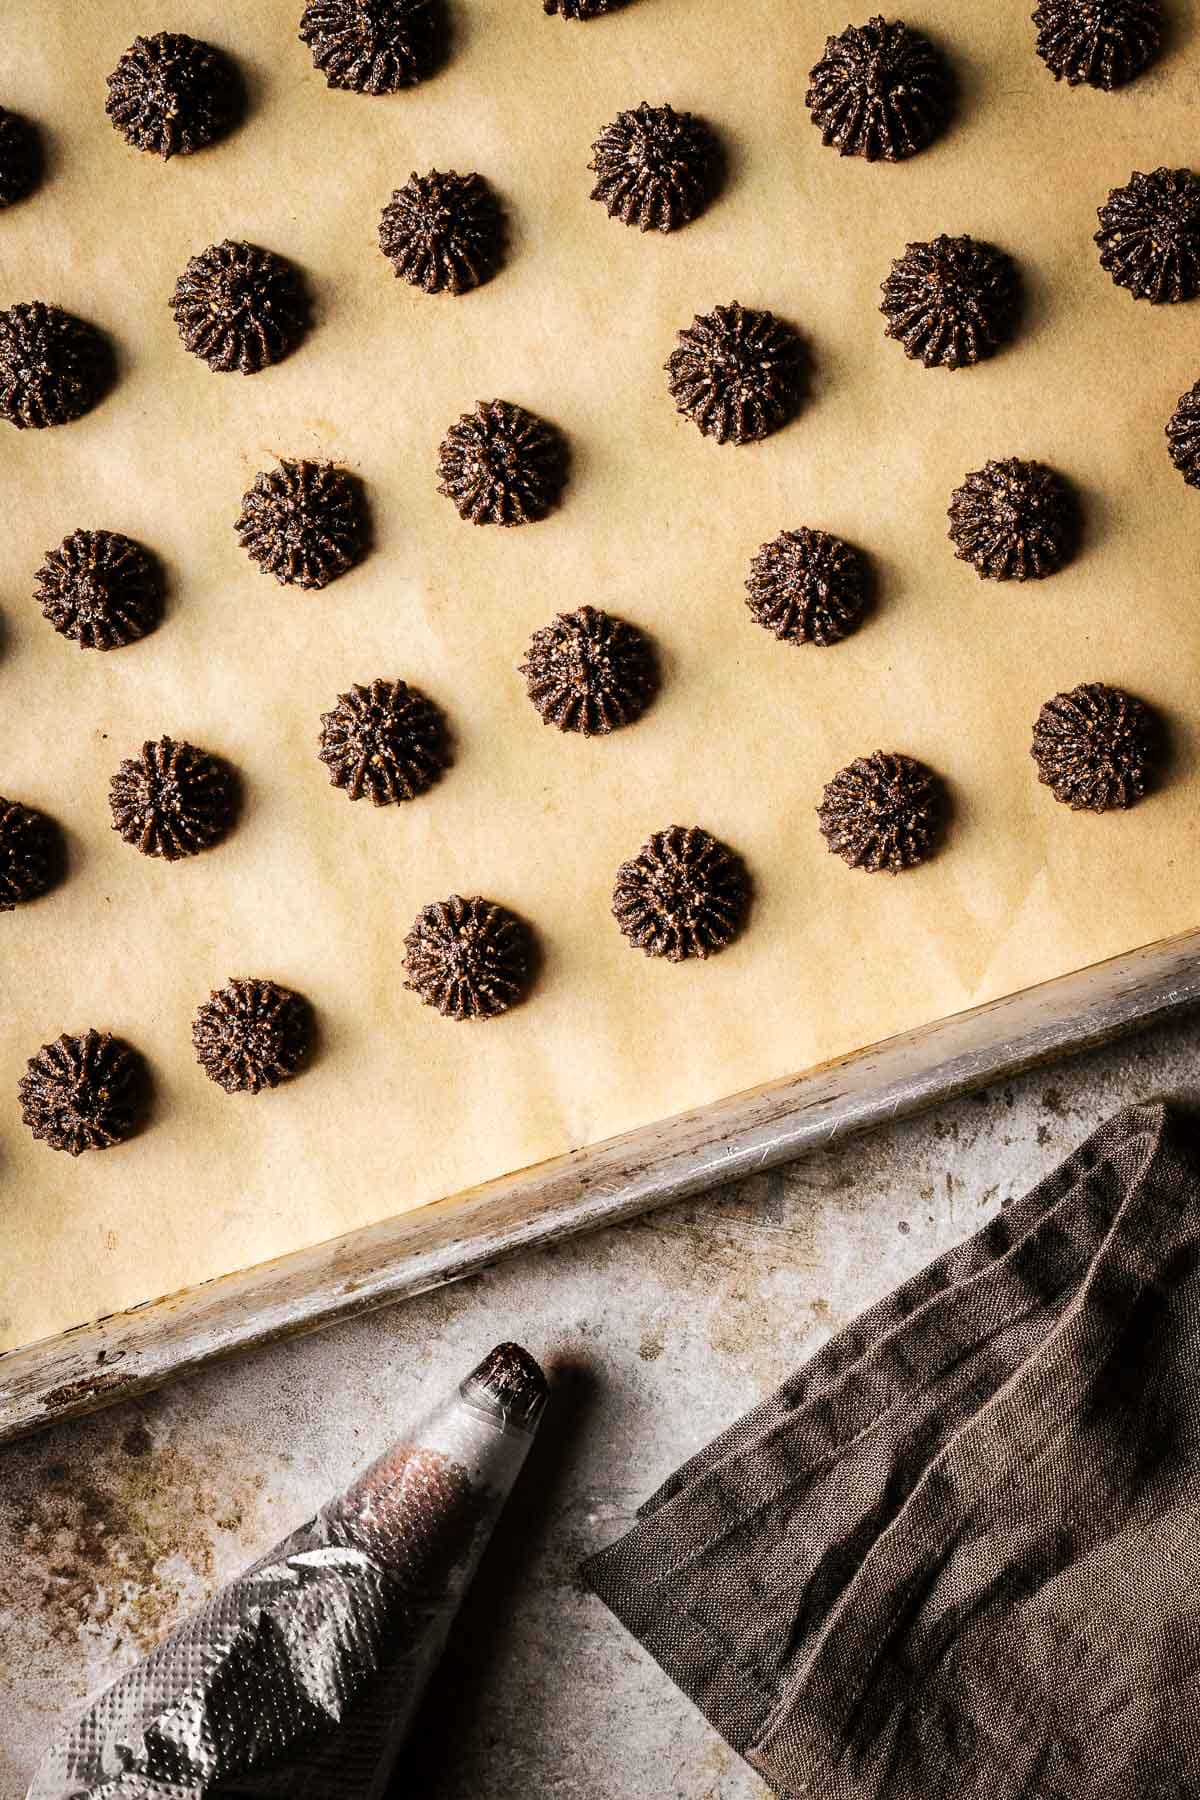 Baci di alassio cookie batter piped in star shapes onto a brown parchment paper lined baking sheet.